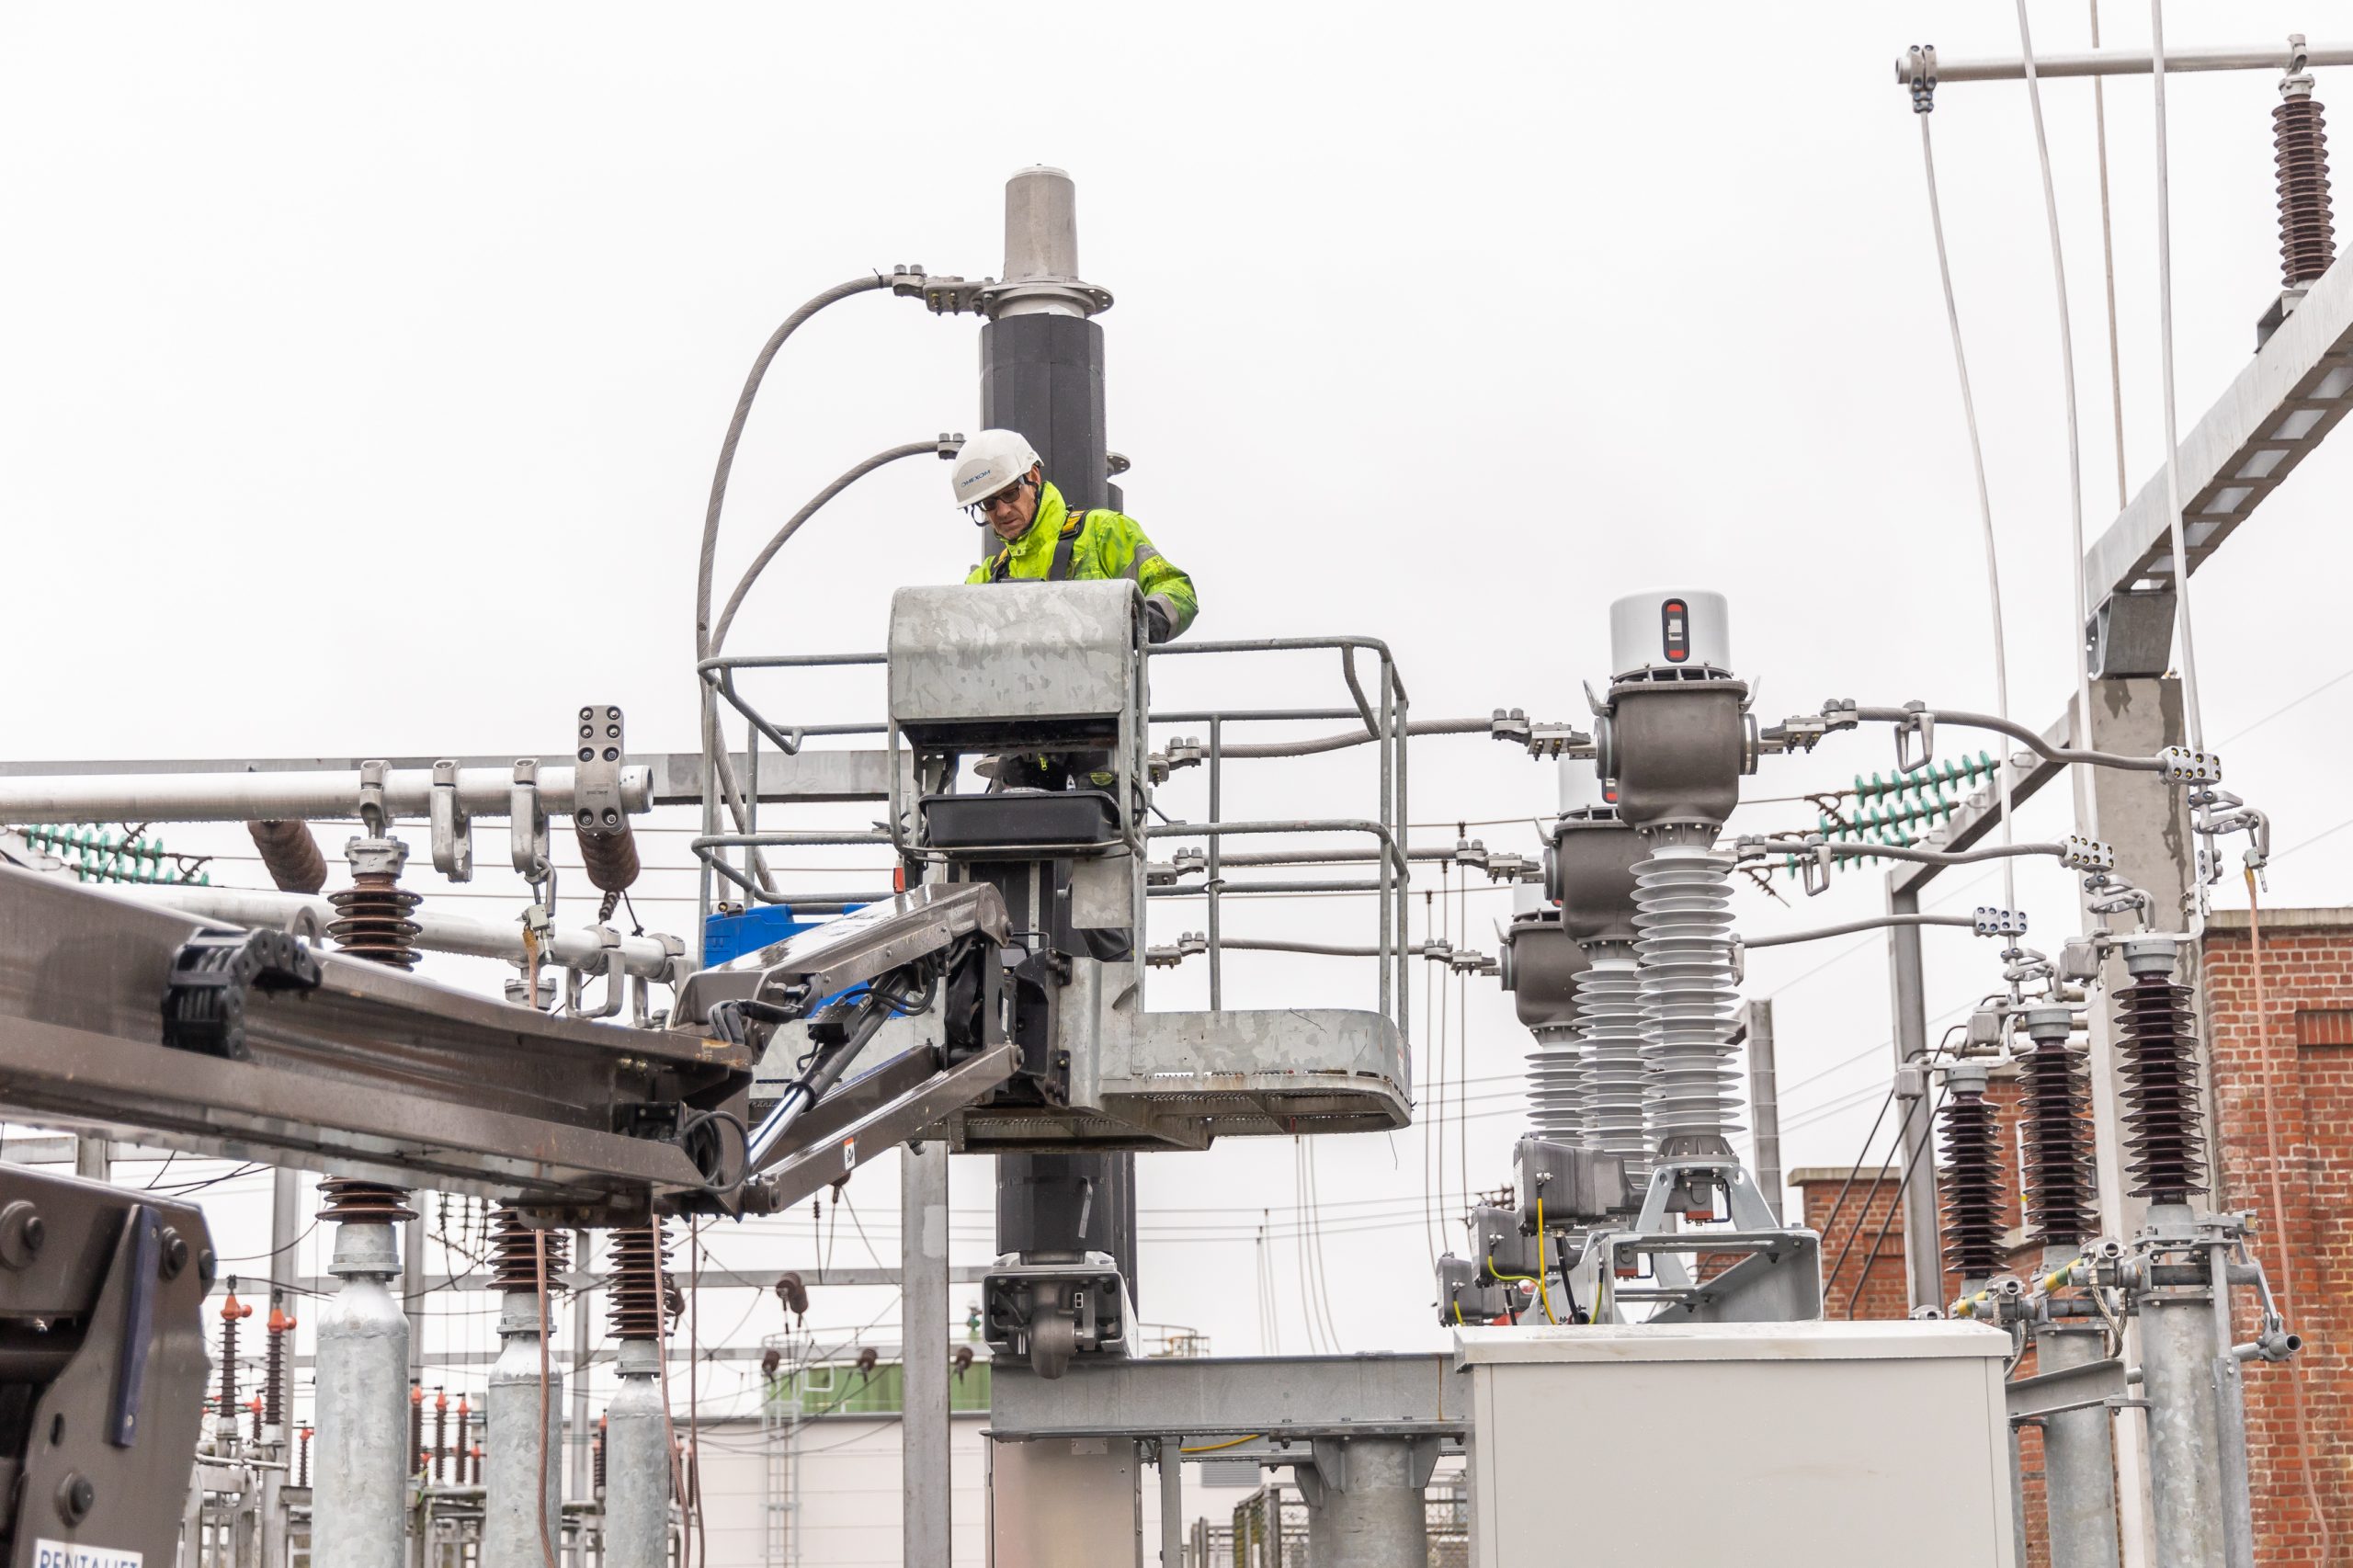 An Omexom employee working outside on the substation